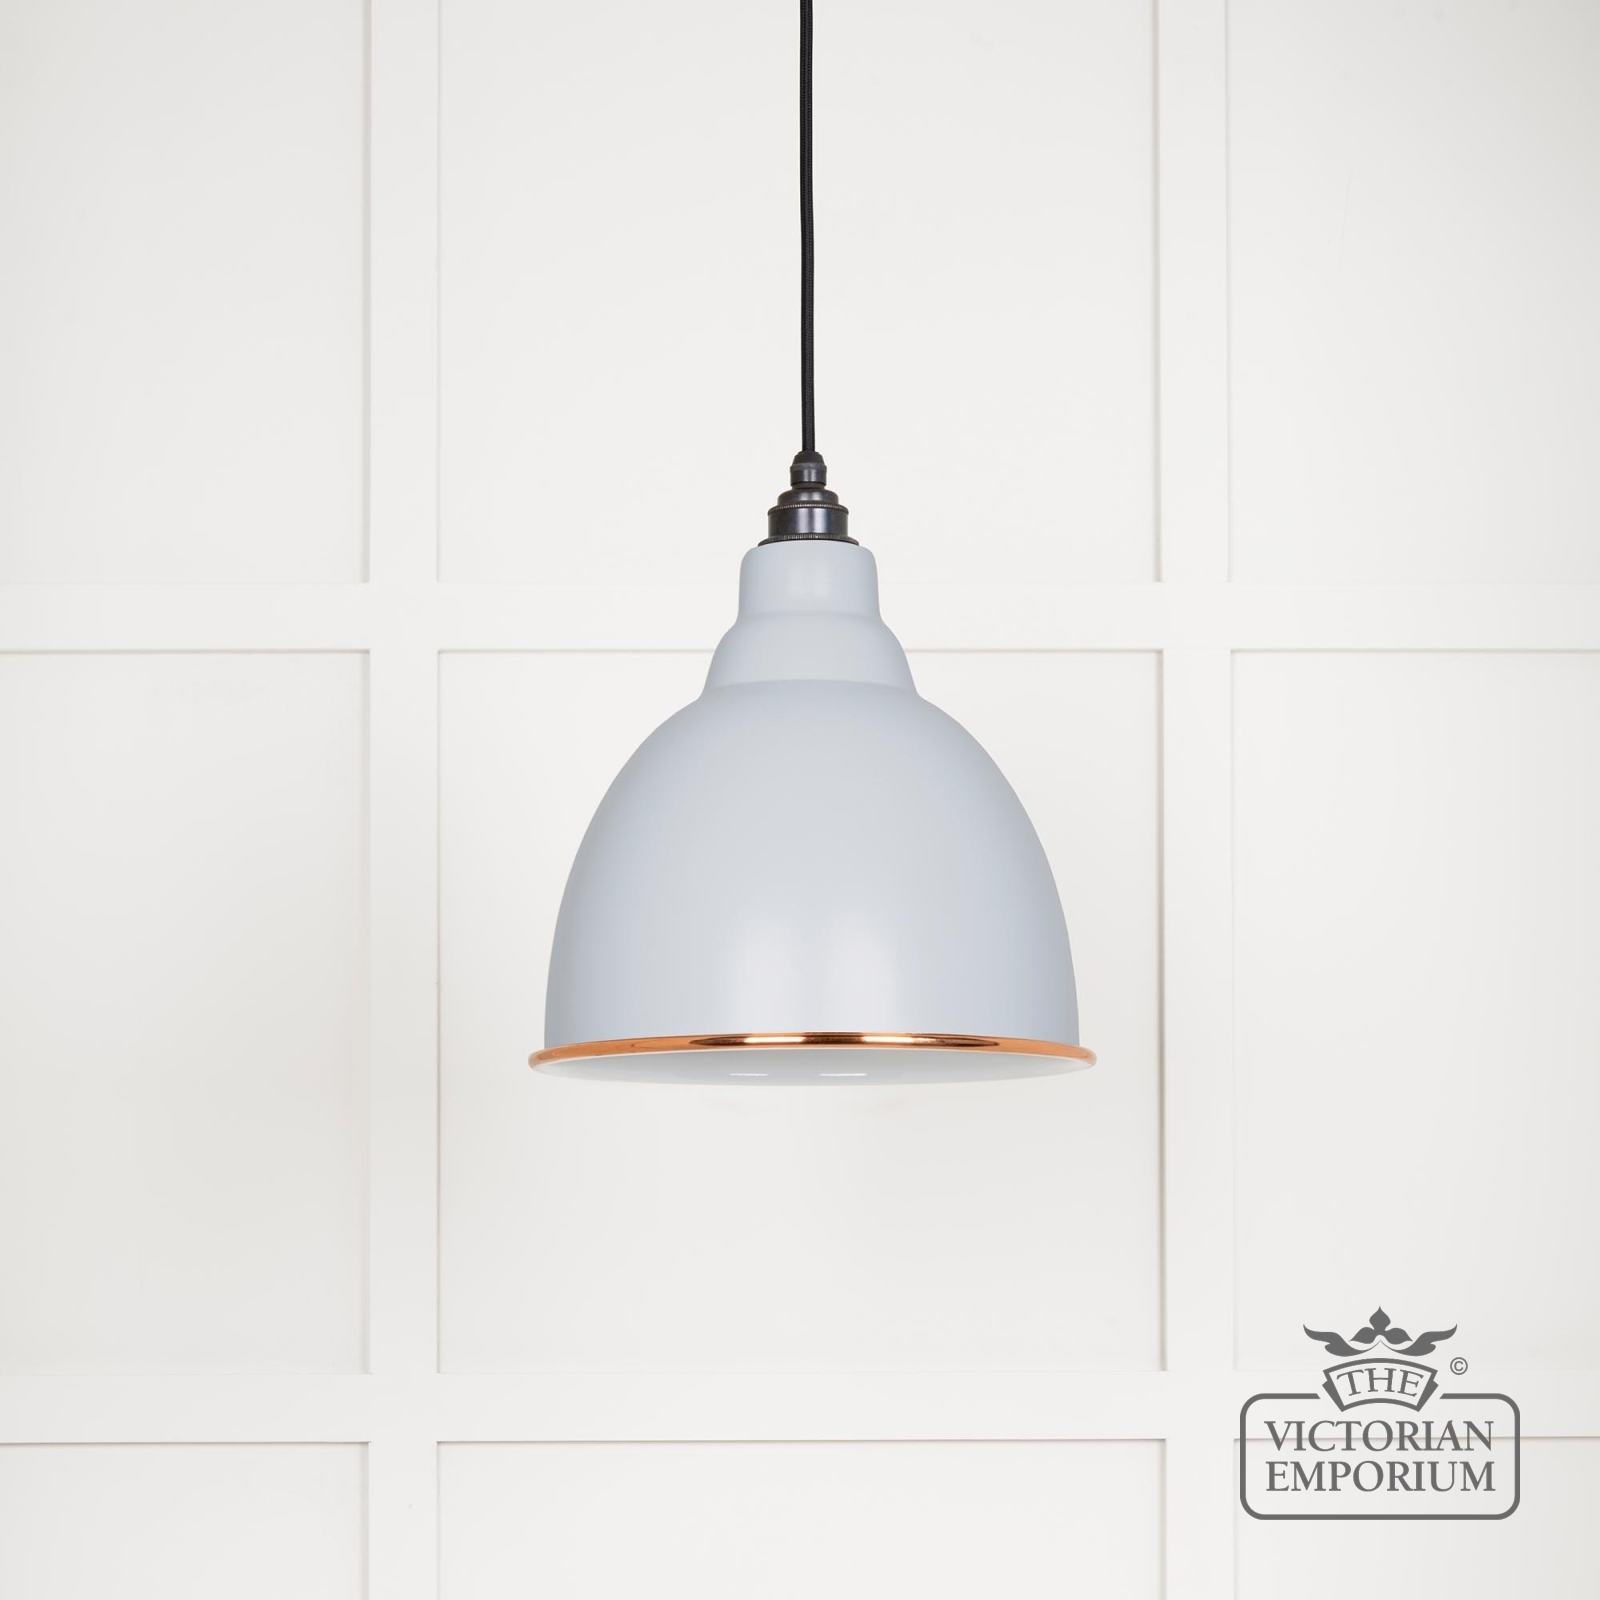 Brindle pendant light in Birch with white gloss interior